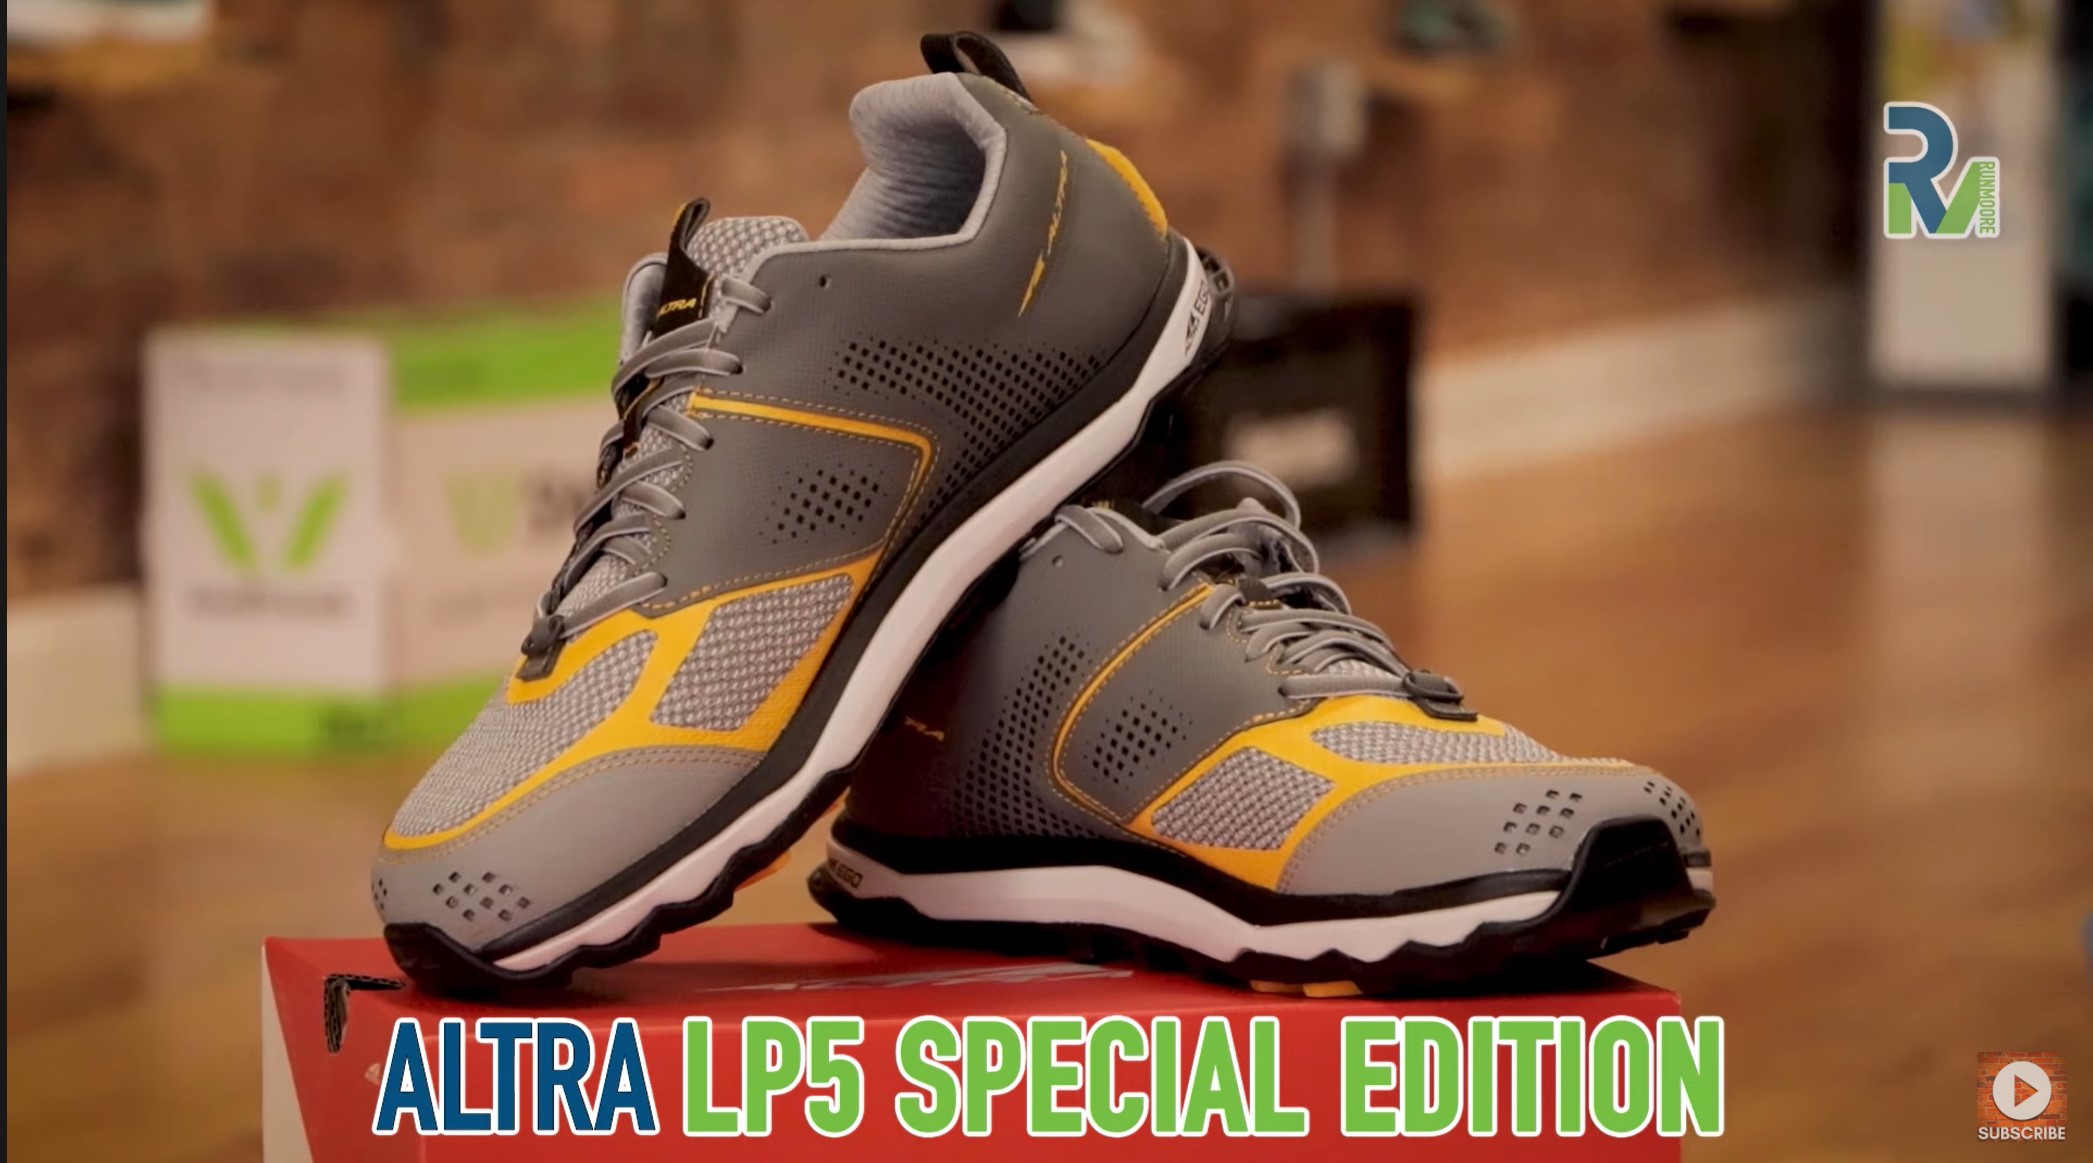 altra lone peak special edition available